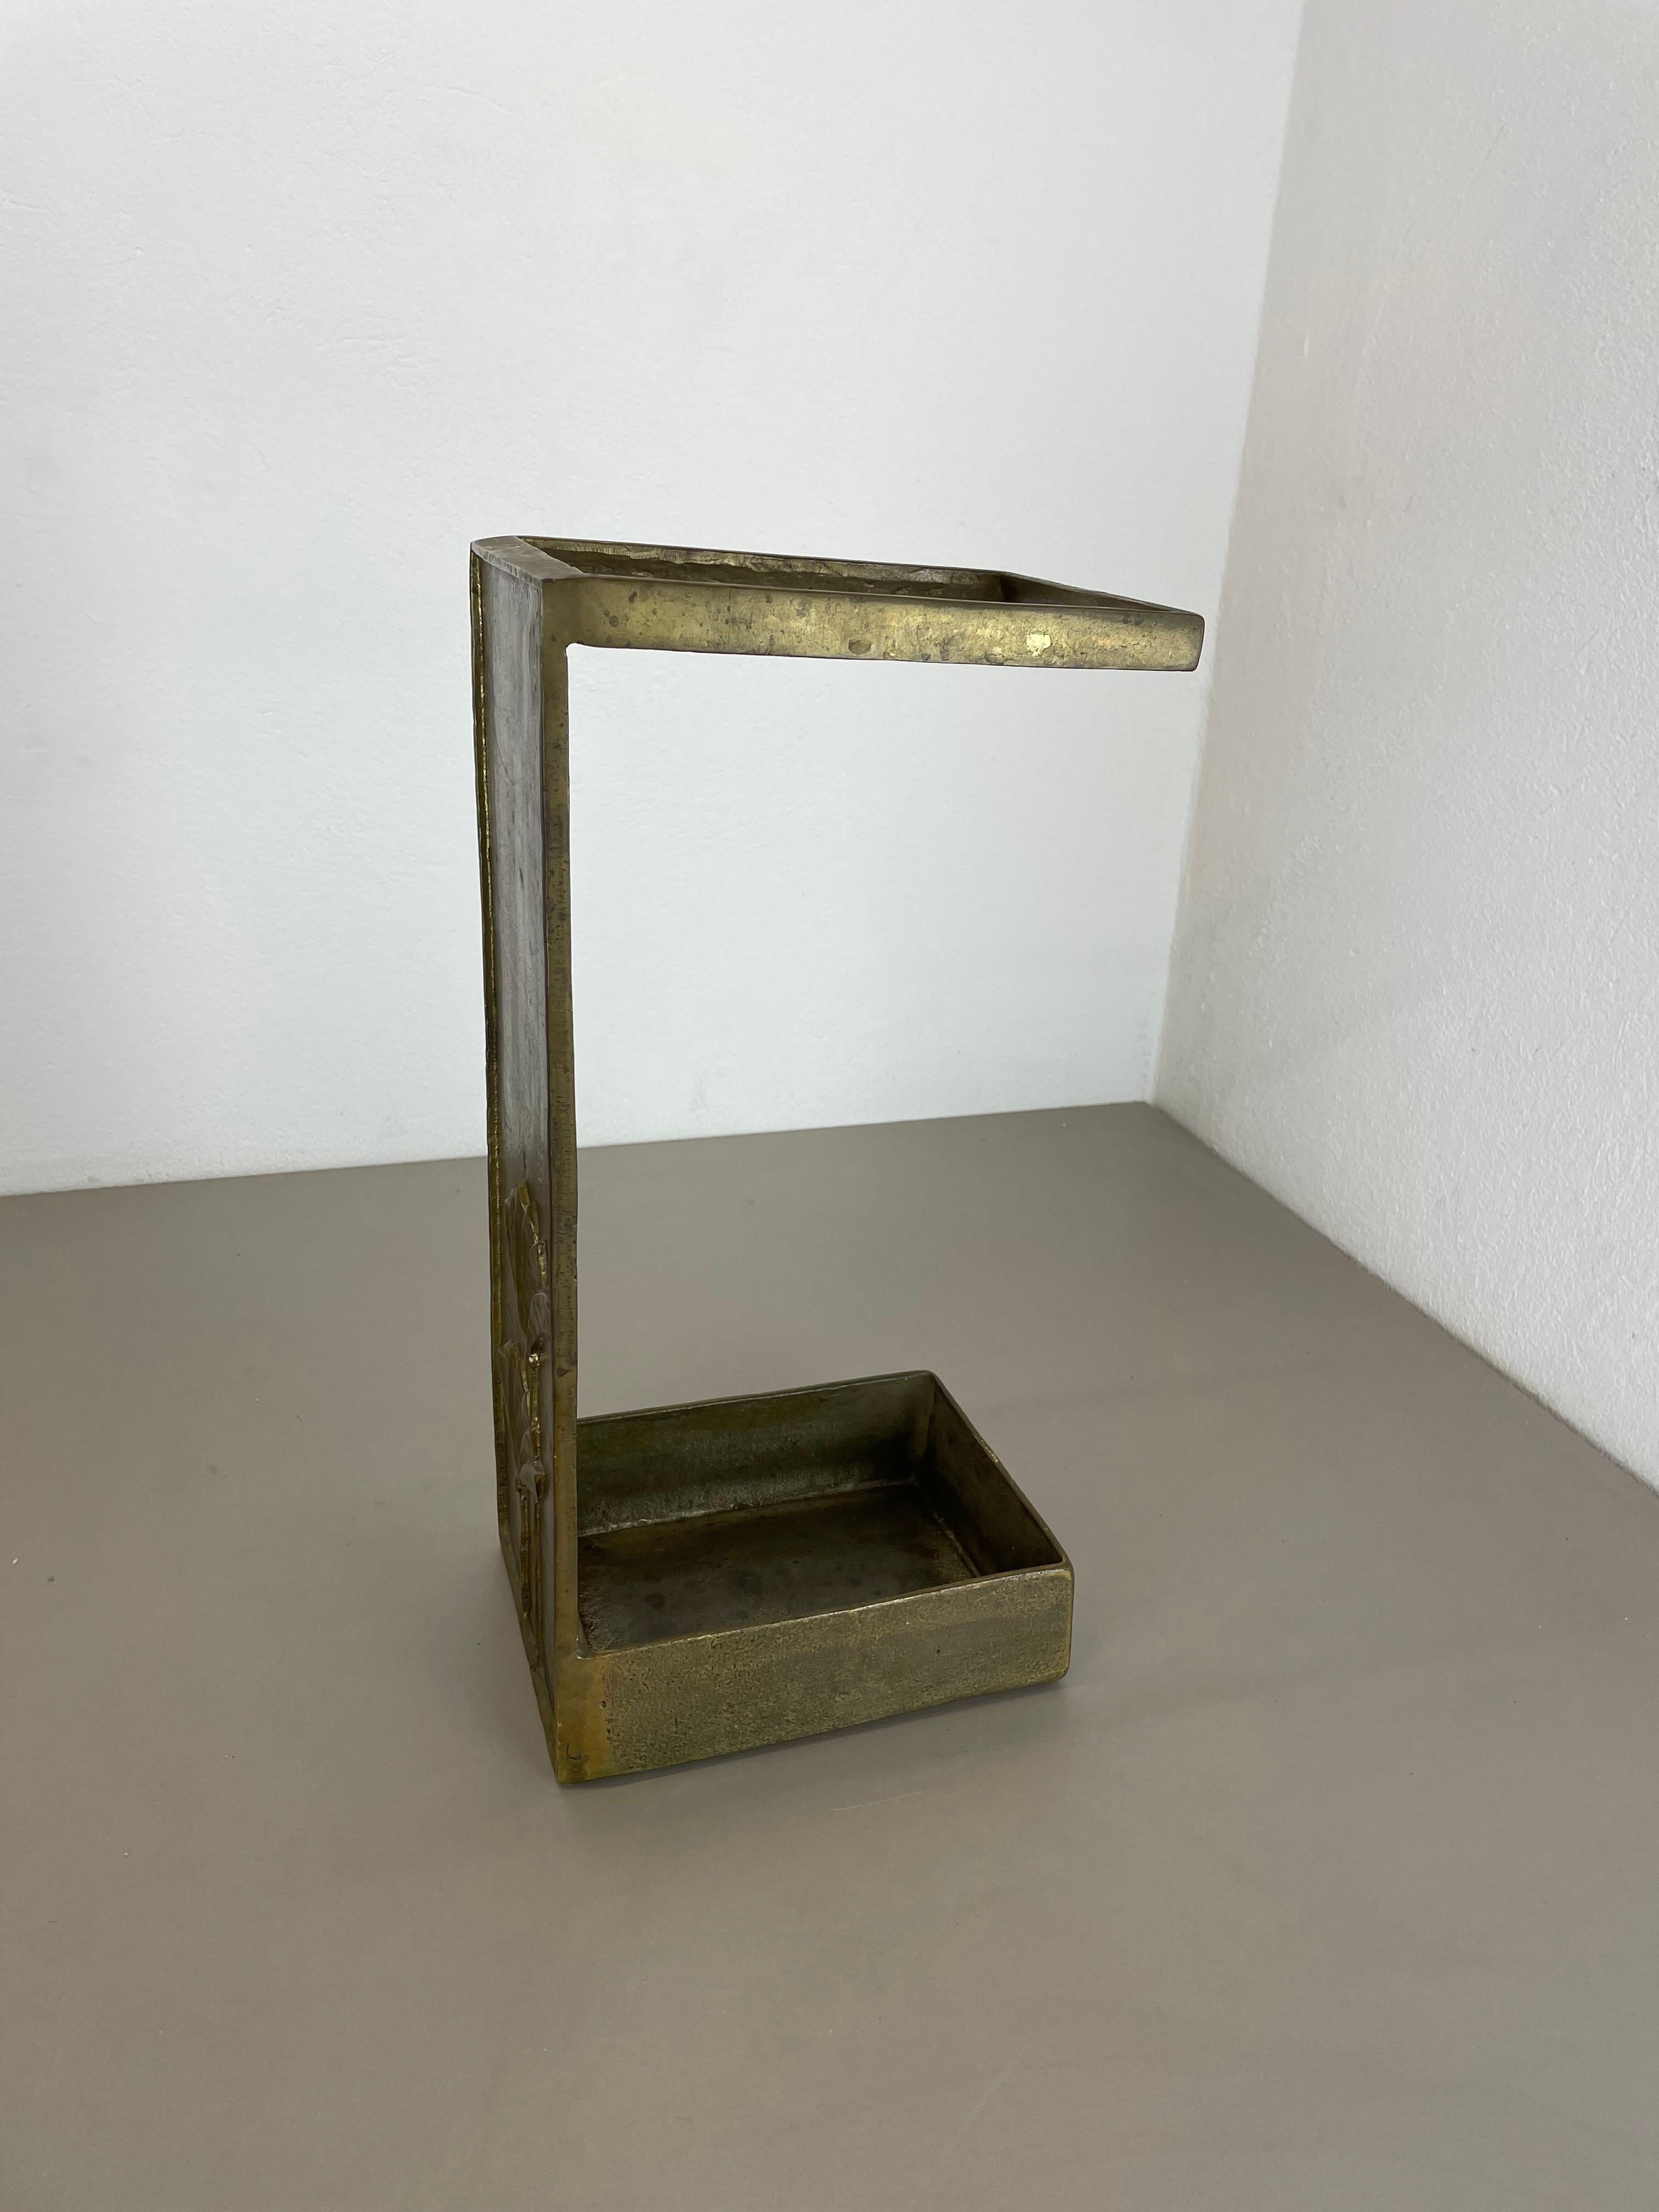 20th Century Hollywood Regency Solid 7.5kg Brutalist Floral Brass Umbrella Stand, Italy 1970s For Sale